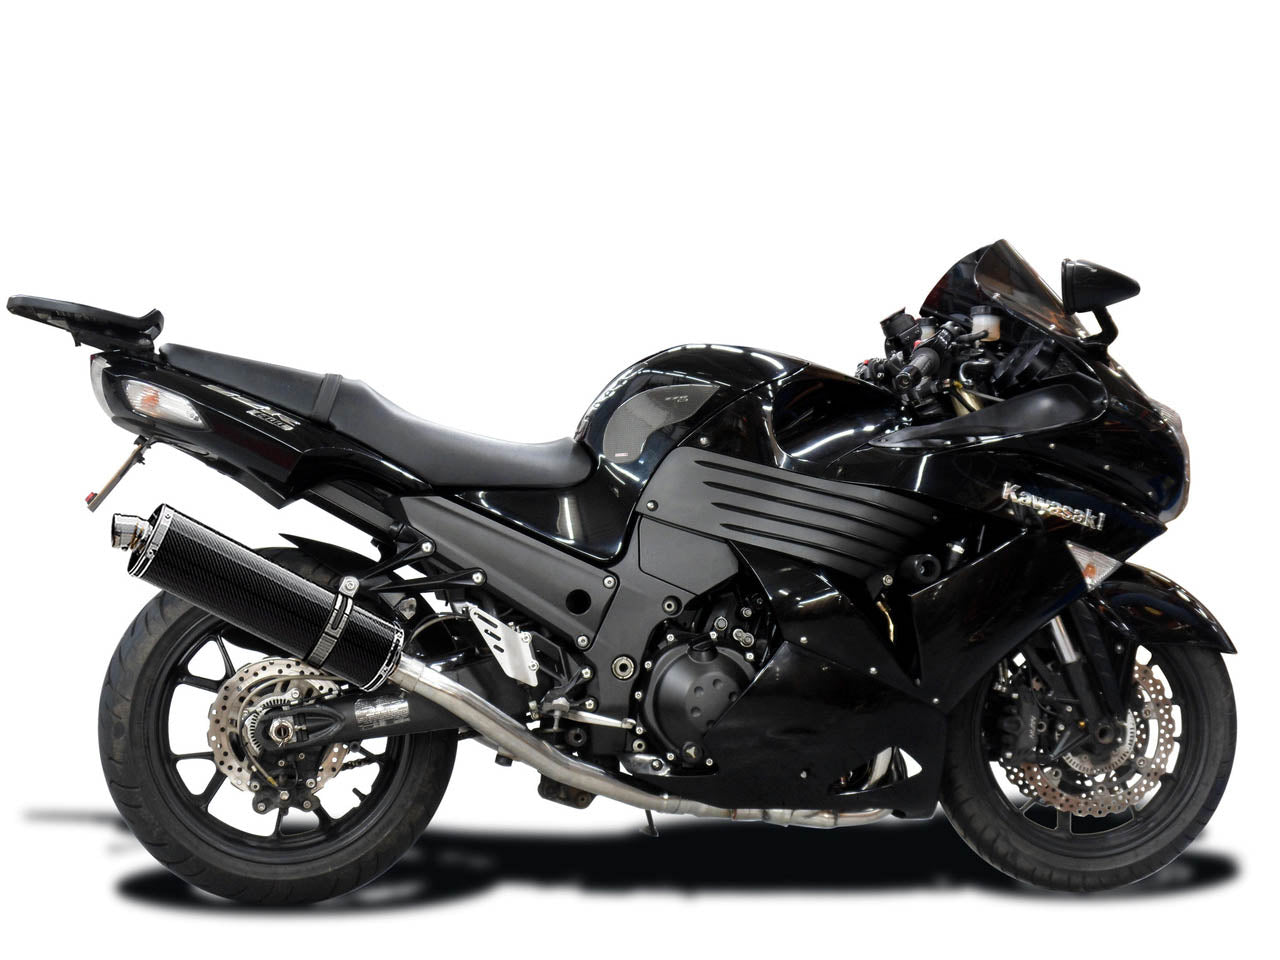 DELKEVIC Kawasaki Ninja ZX-14 (08/11) Full Exhaust System with Stubby 18" Carbon Silencers